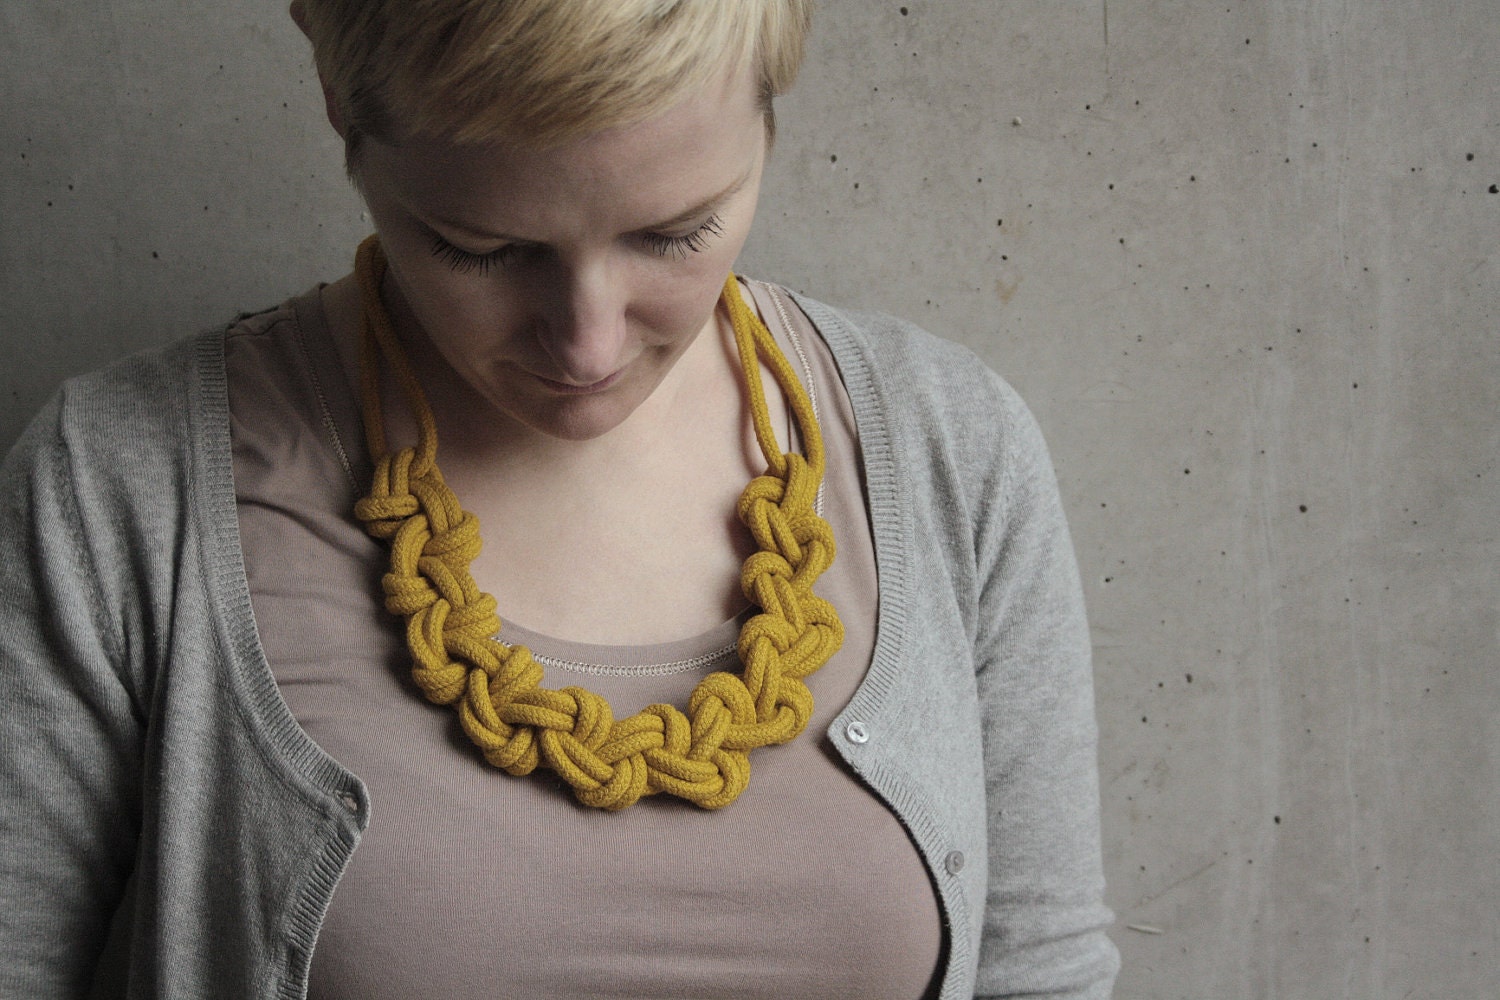 Knotted rope necklace "Lene" in curry yellow